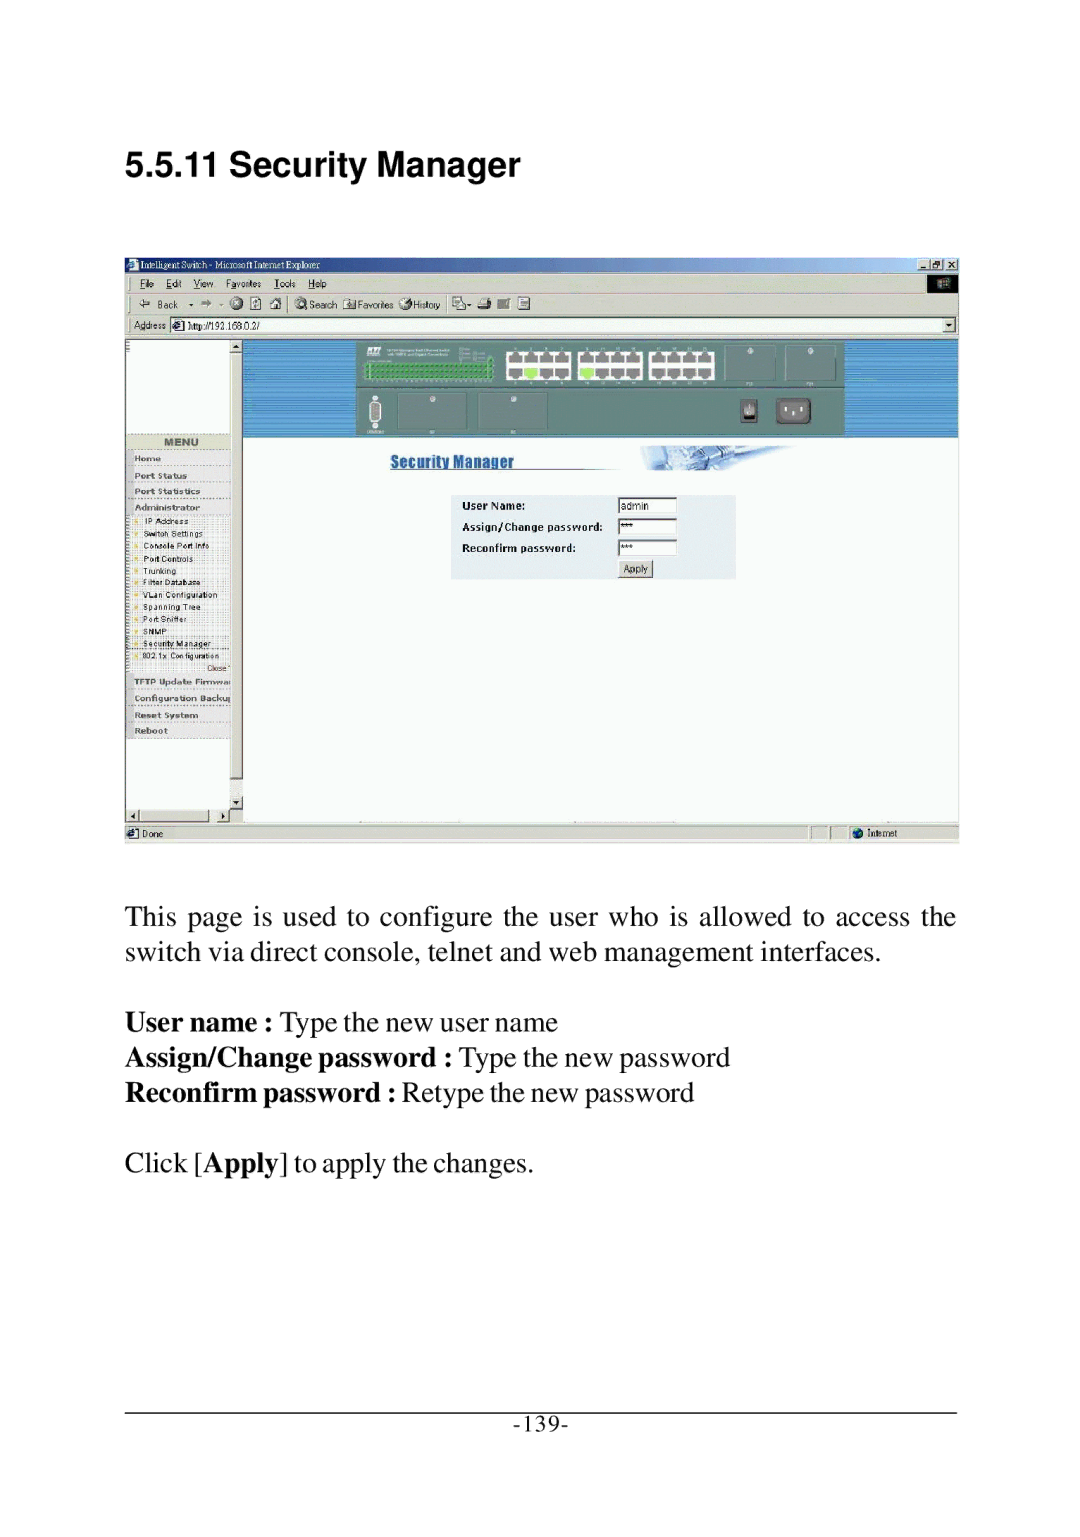 KTI Networks KS-2260 operation manual Security Manager, Assign/Change password Type the new password 